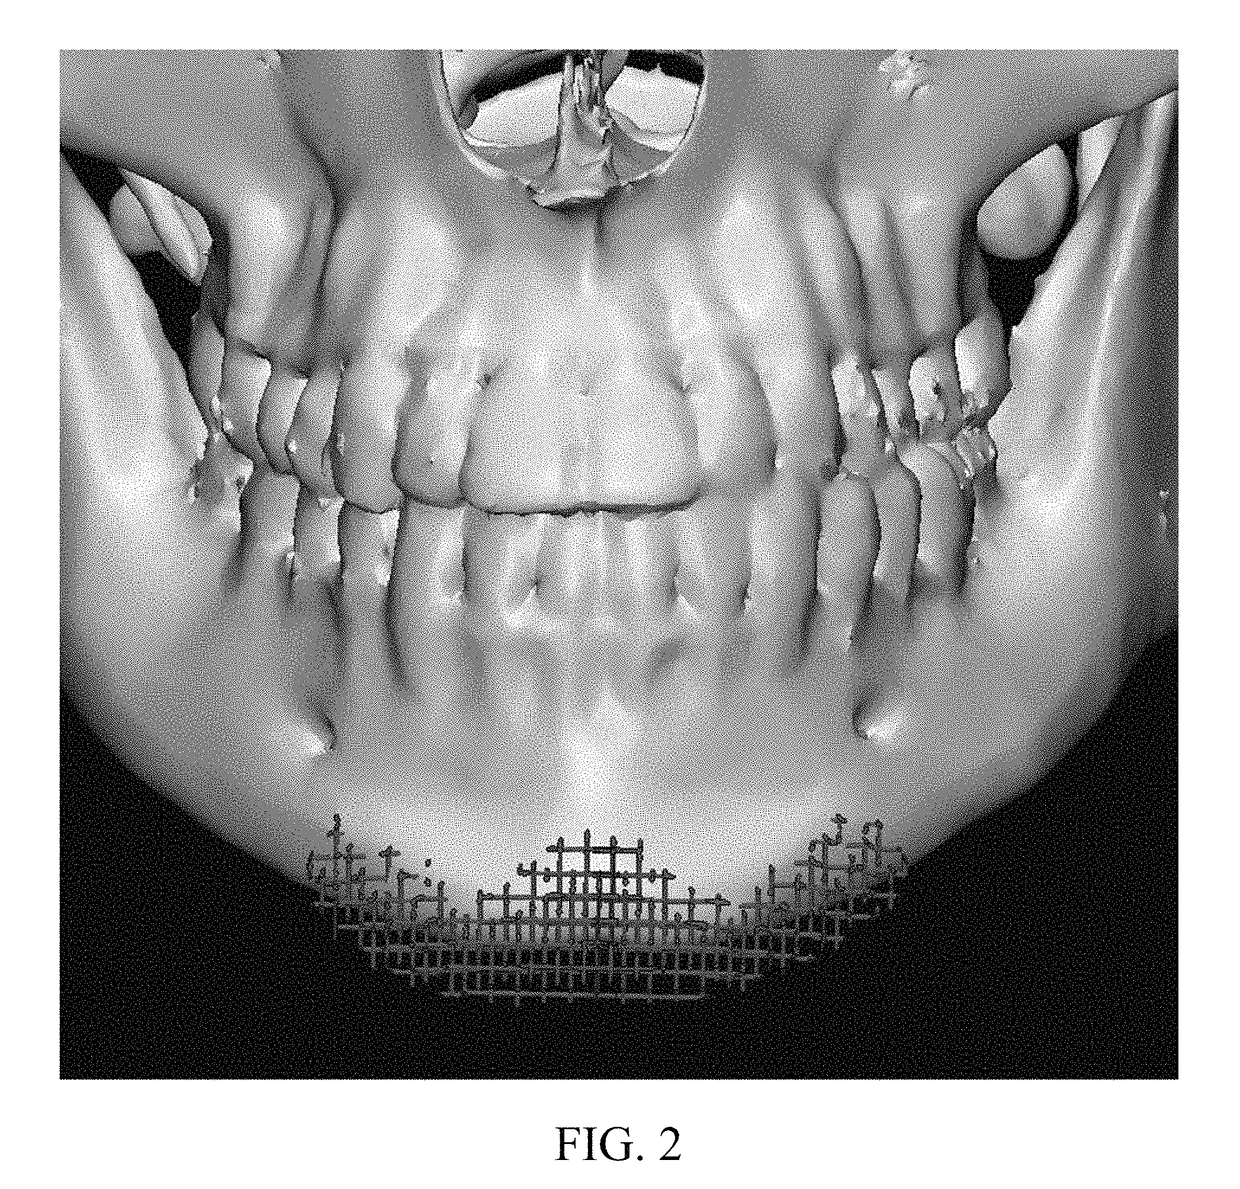 Osteoconductive and osteoinductive implant for augmentation, stabilization, or defect reconstruction